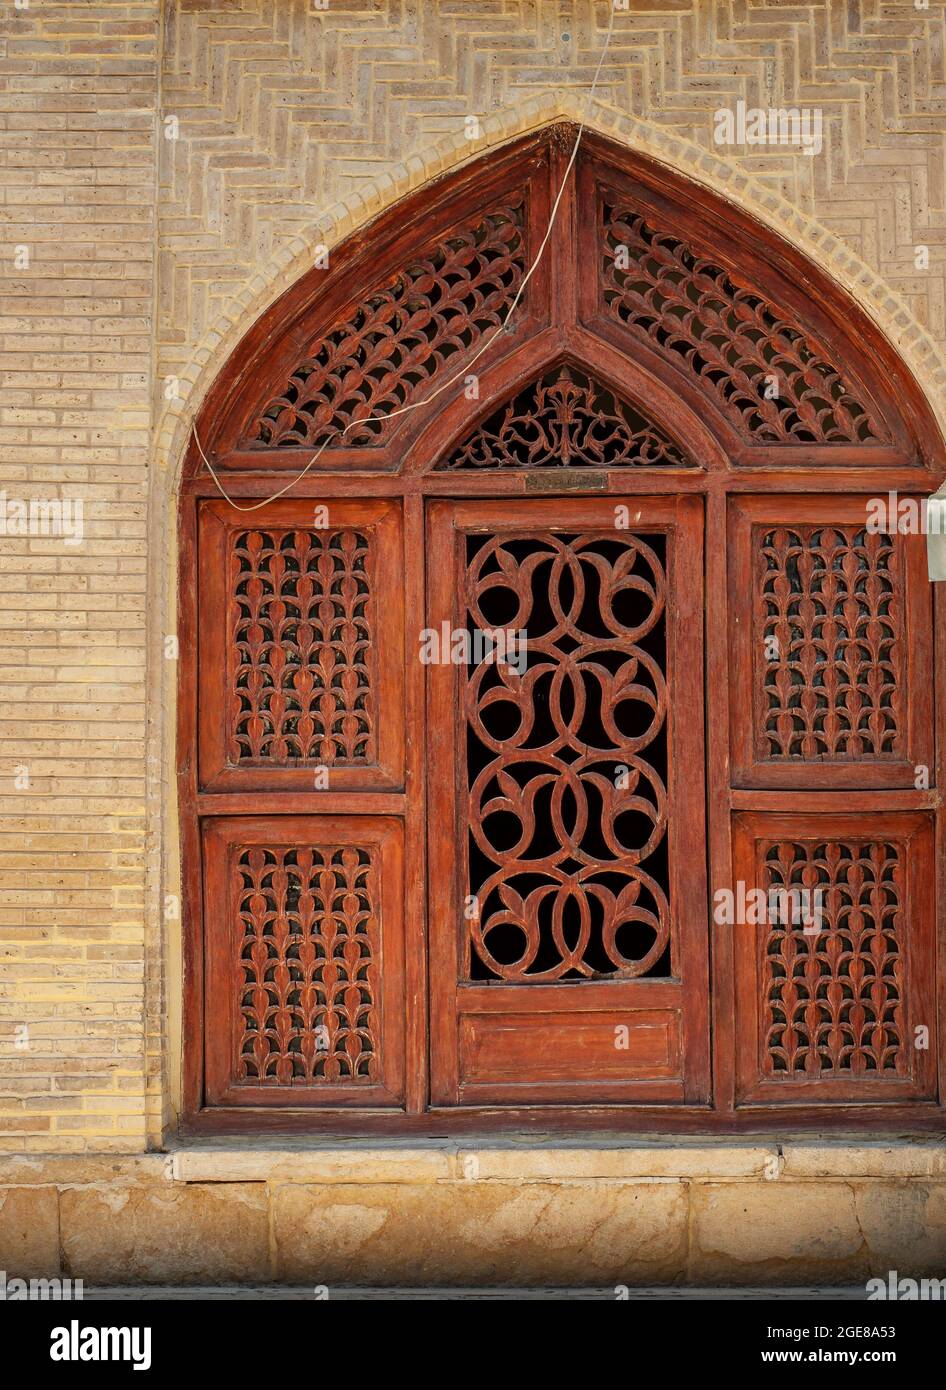 Intricate islamic wood crafted door design, Islamic design carved ...